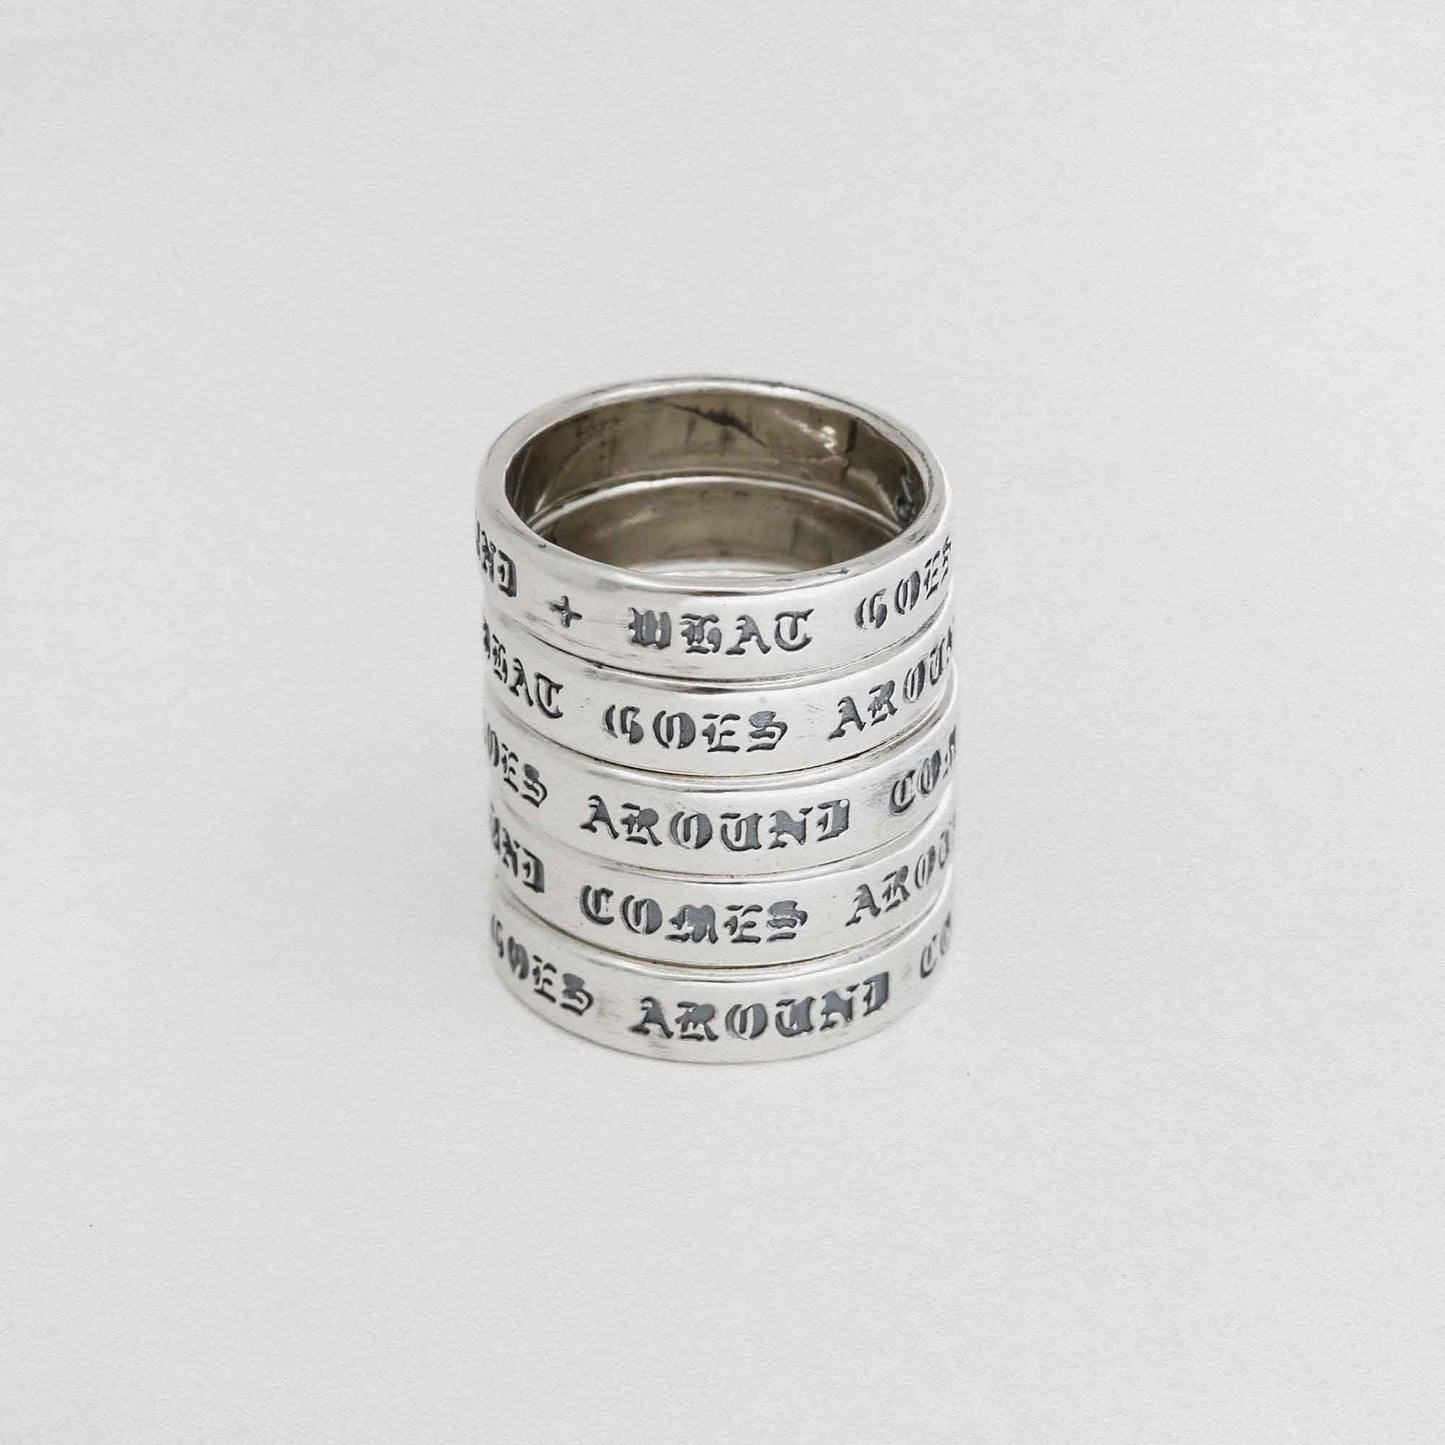 What Goes Around Comes Around Ring In 925 Sterling Silver